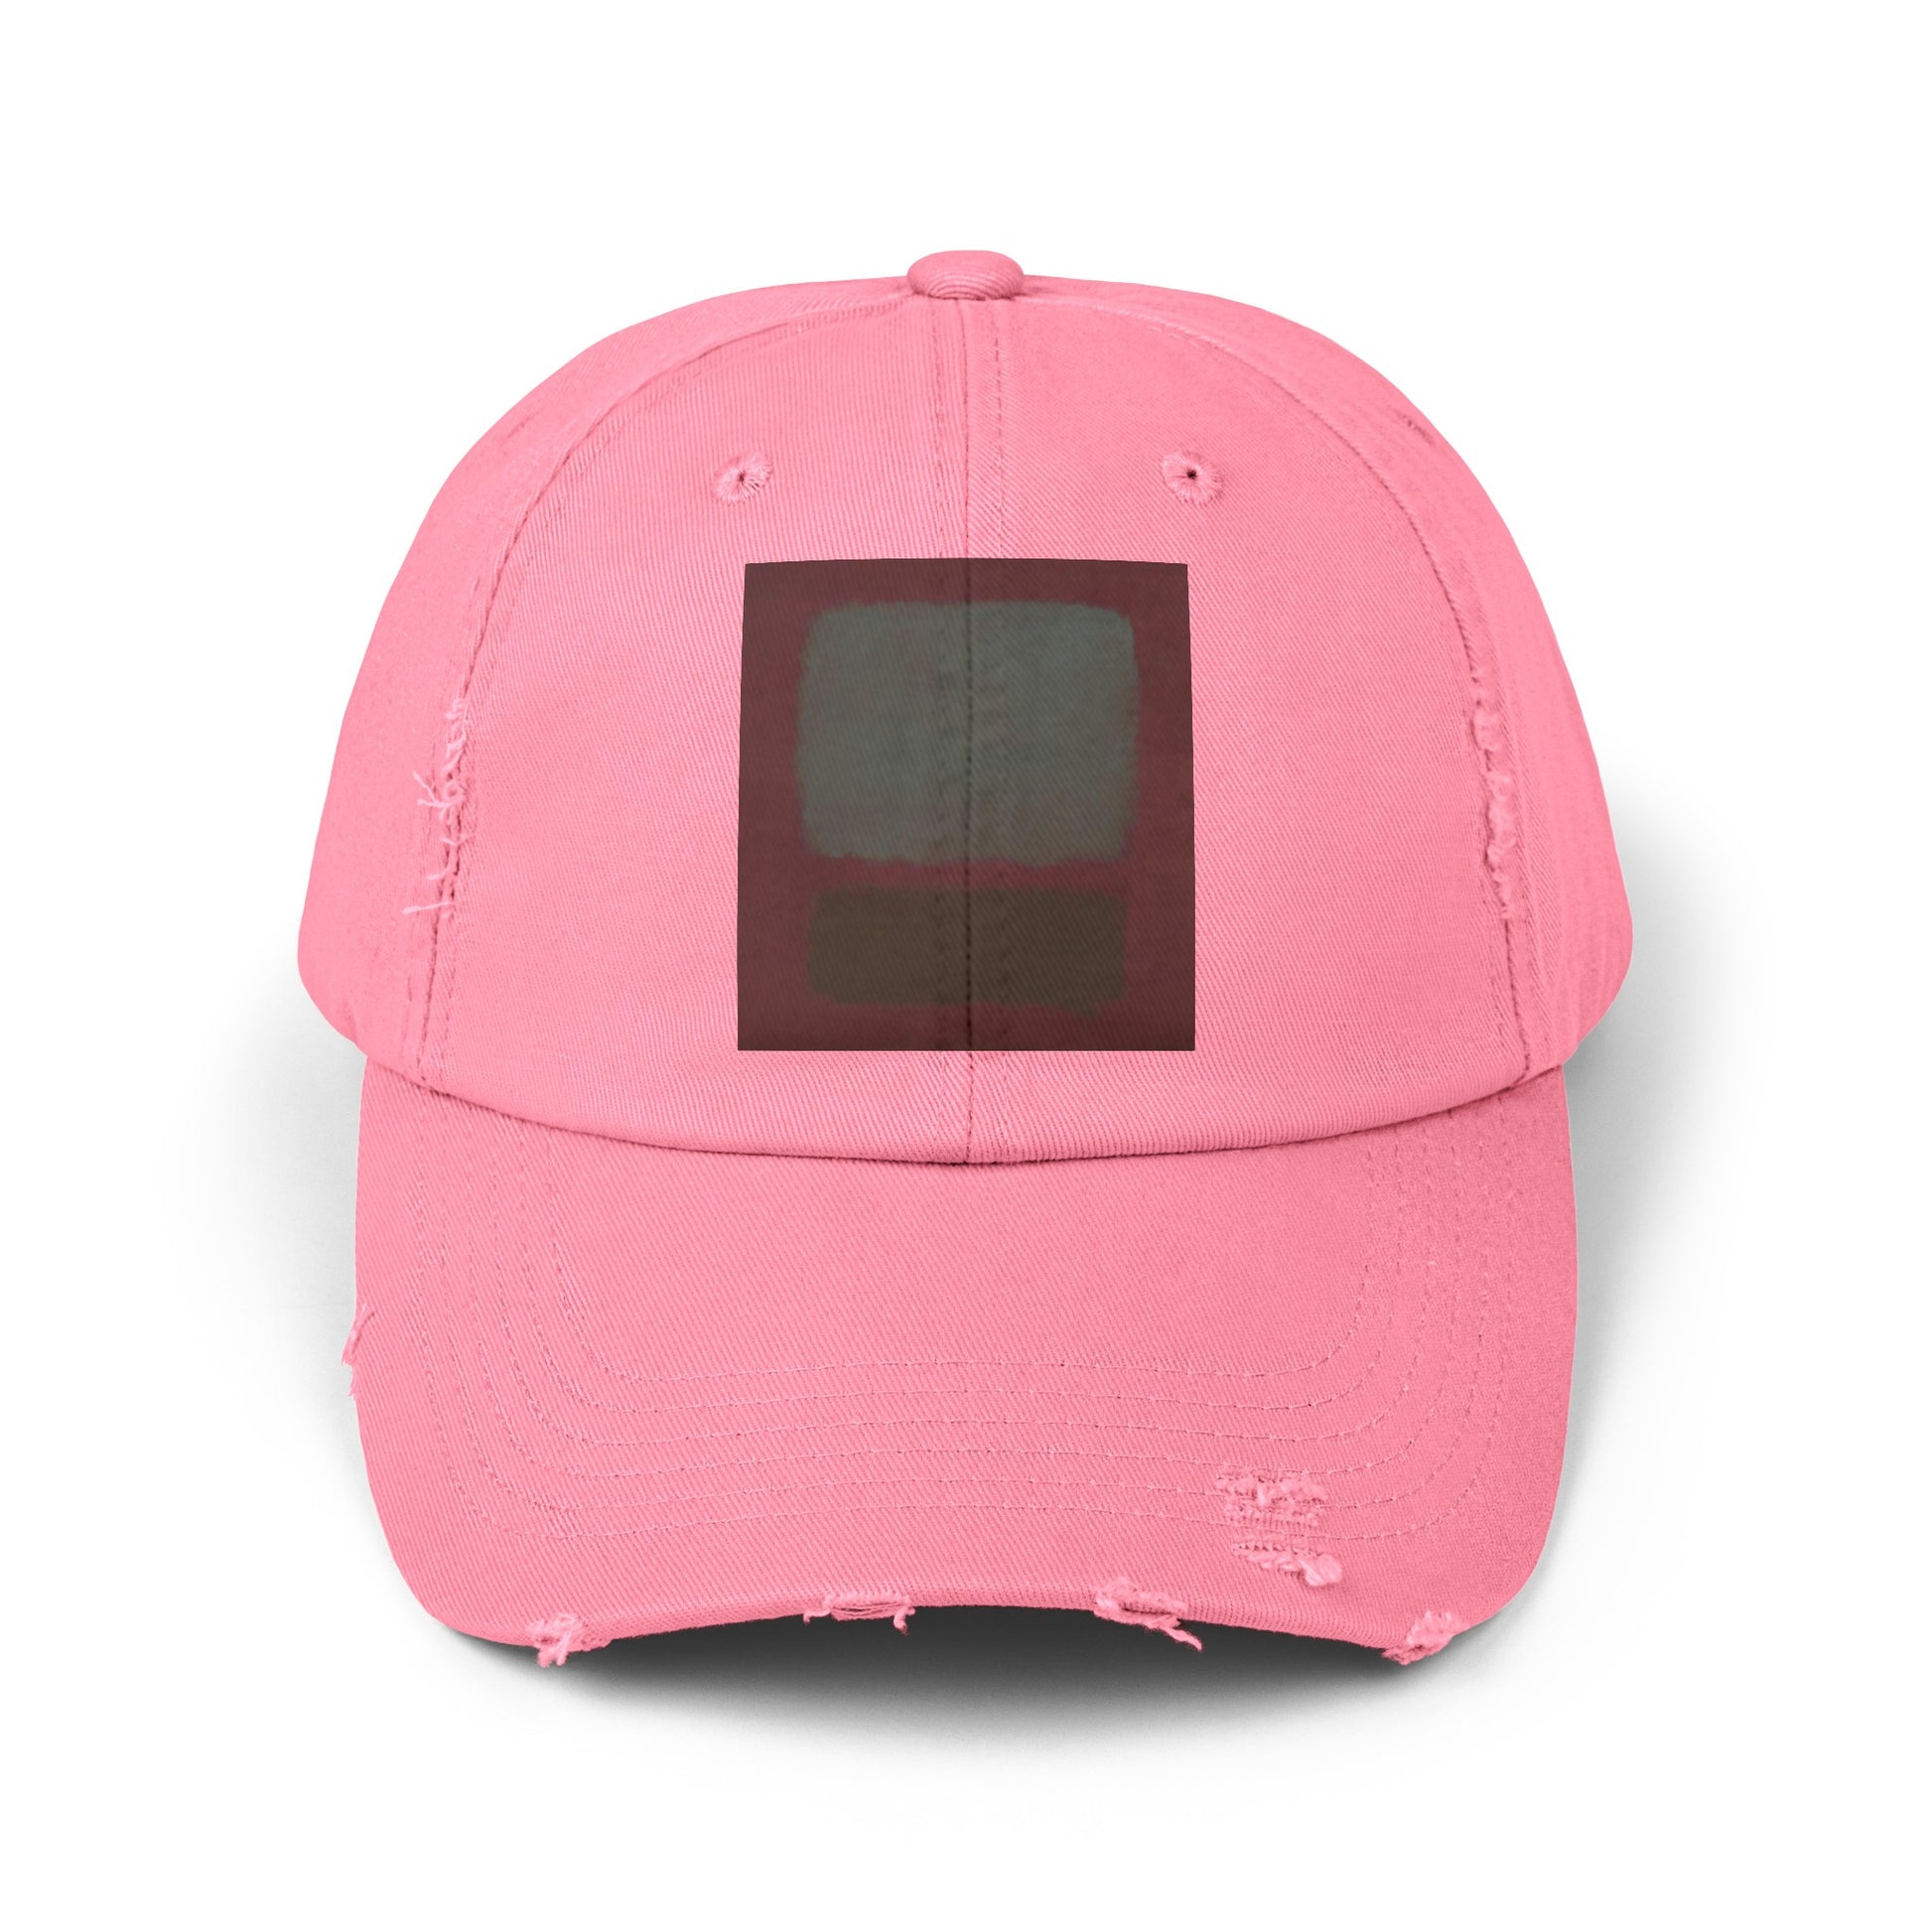 a pink hat with a black square on it